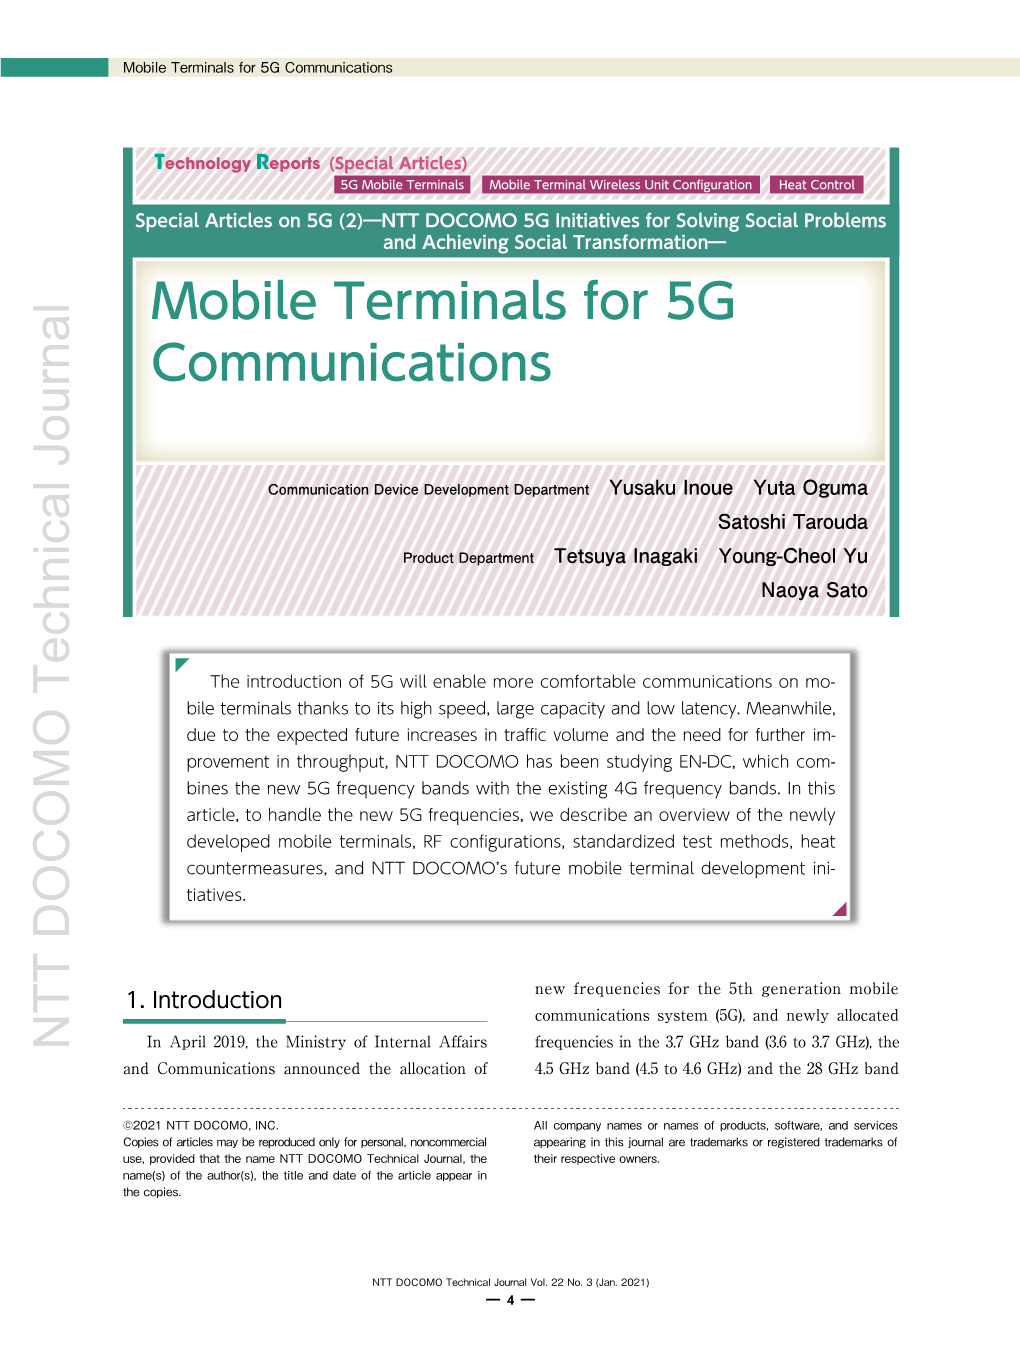 Mobile Terminals for 5G Communications